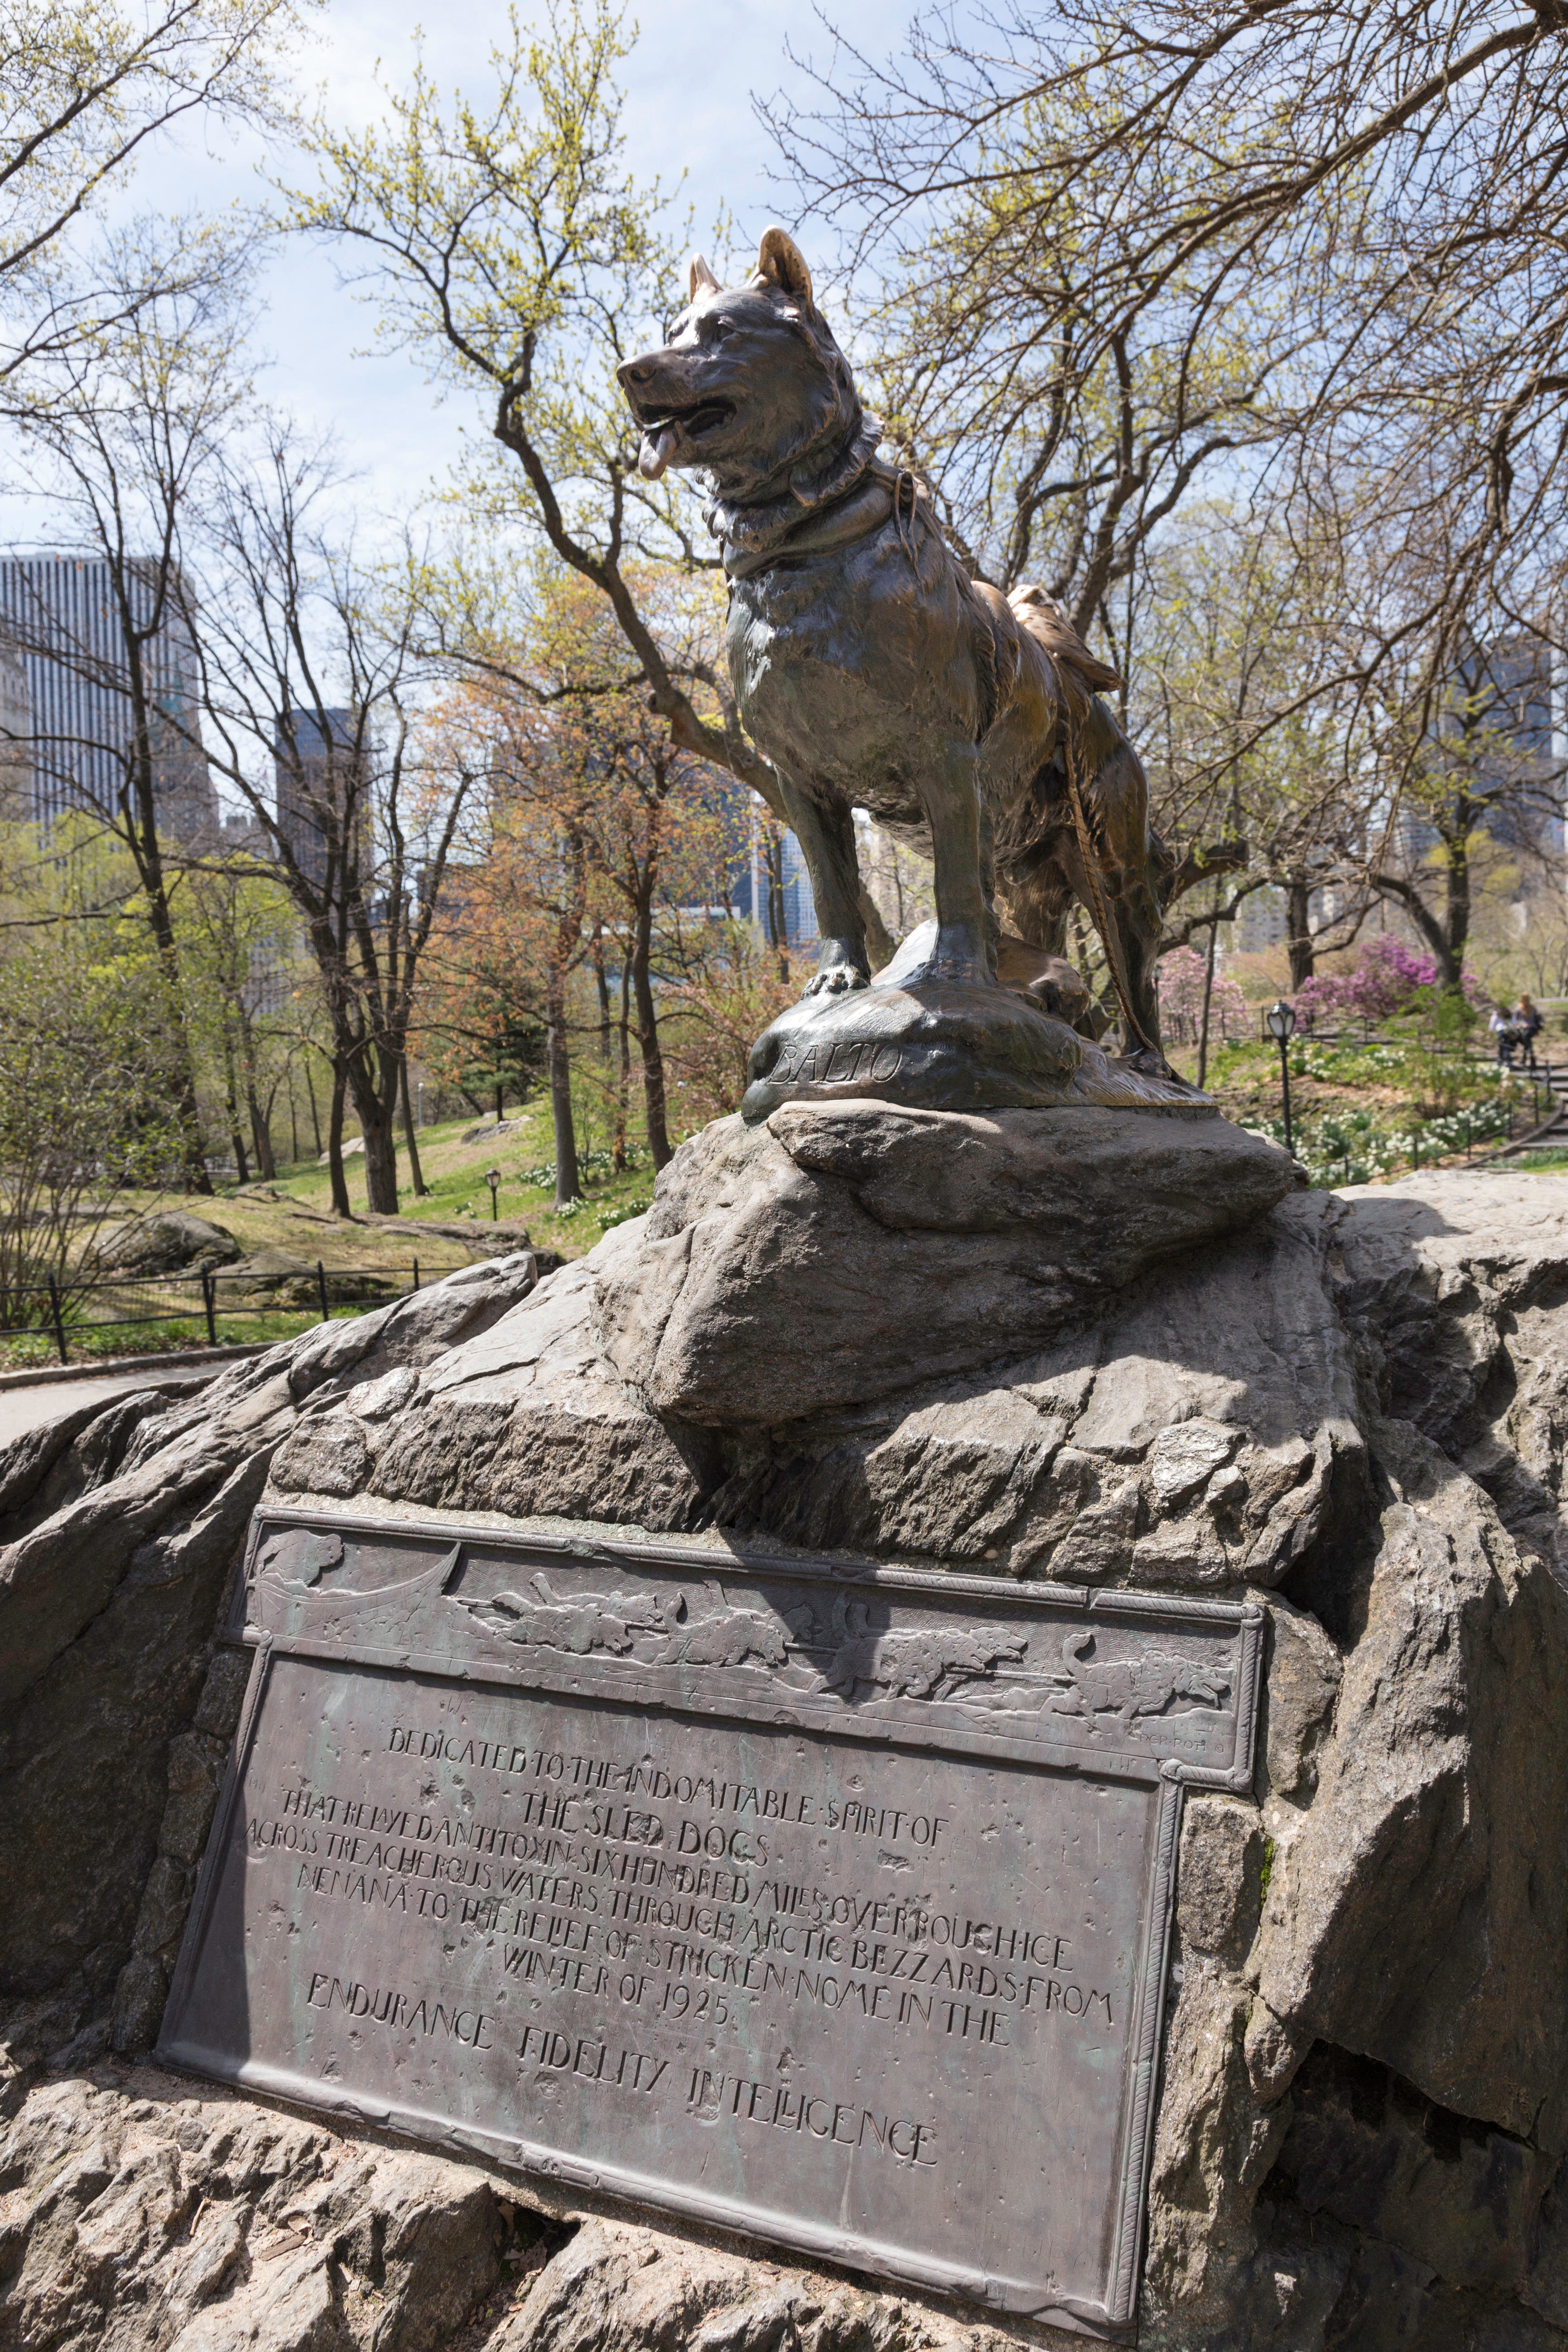 Statue made in honor of the real dog Balto, standing in a park.